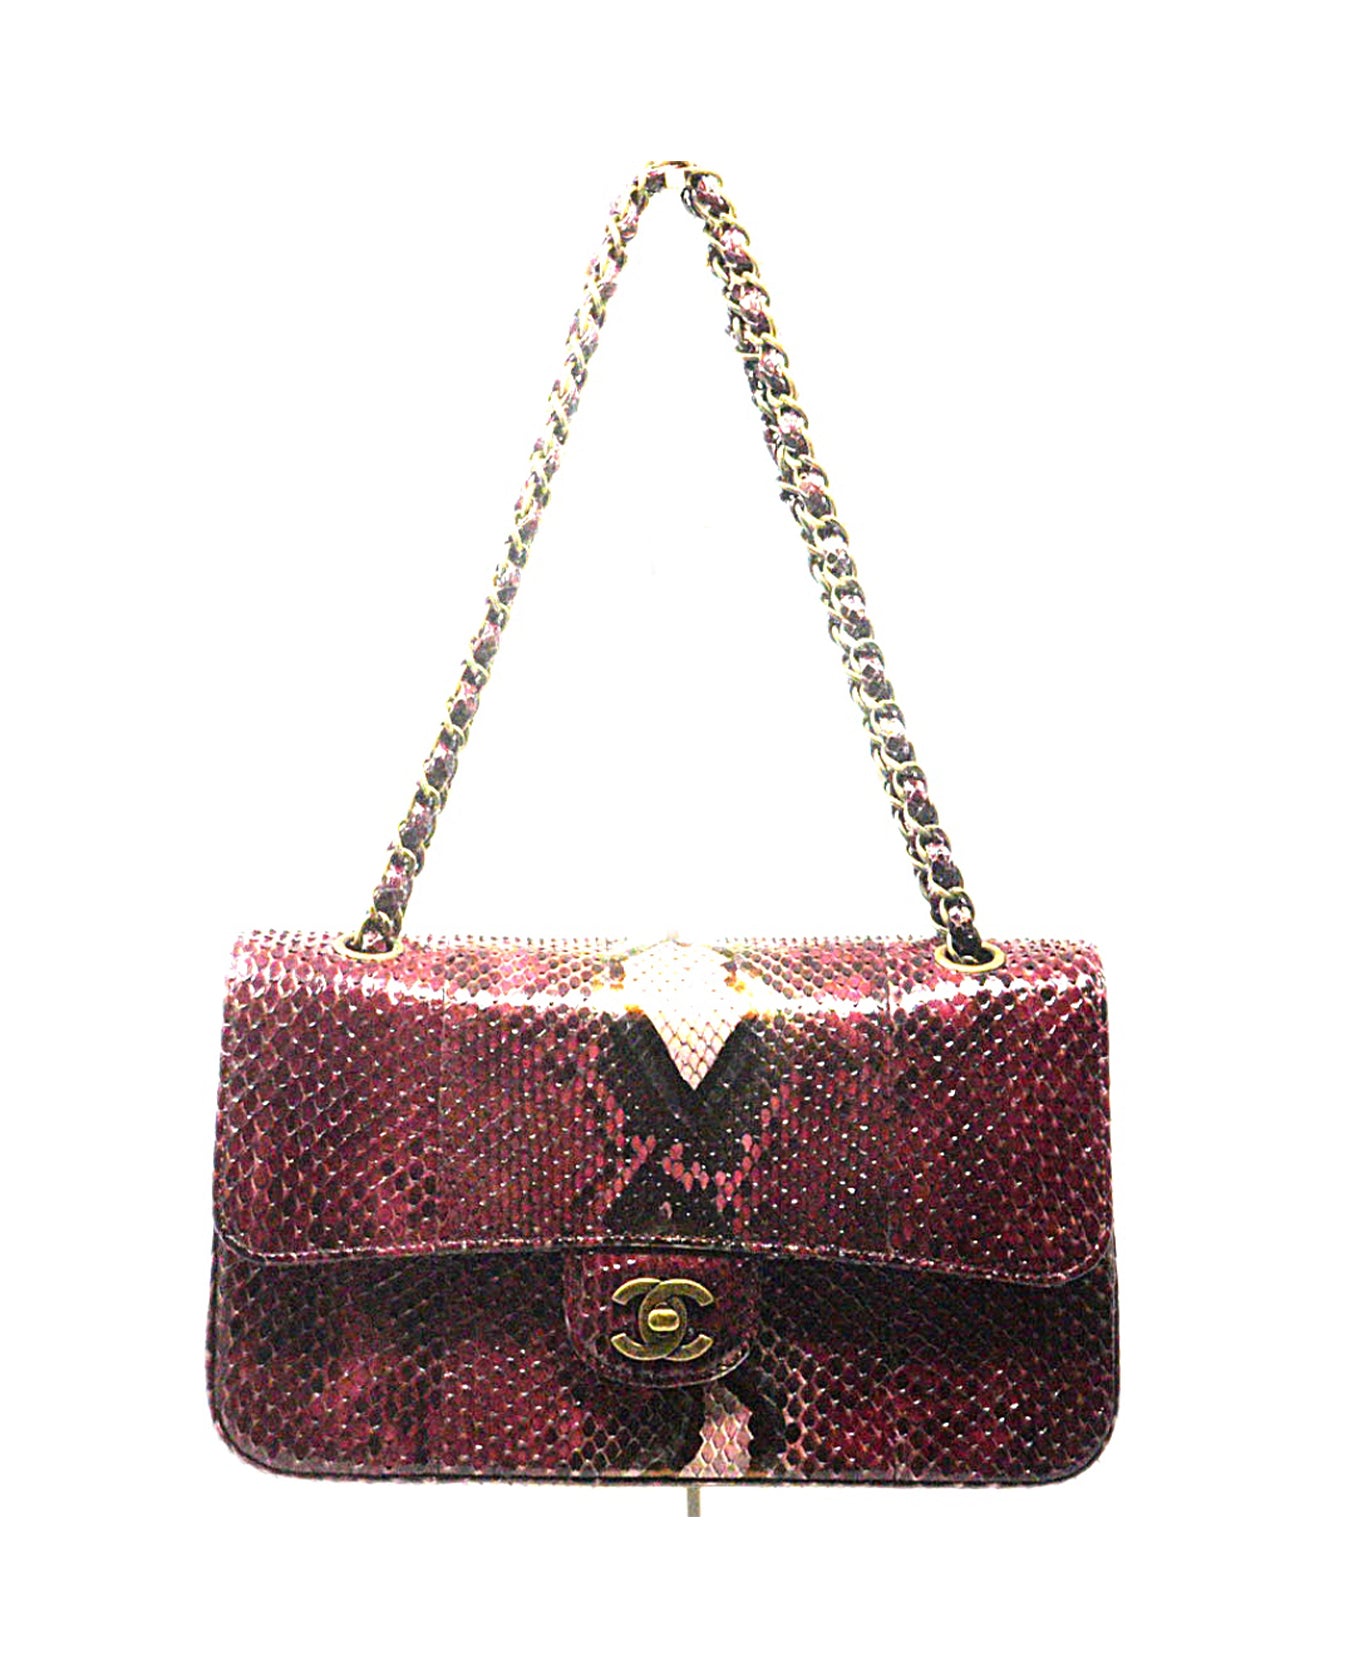 Found by Fred Segal - Women's Chanel Snakeskin GHW Medium Classic Bag | Color: Bordeaux | Size: 10.24 x 6.25